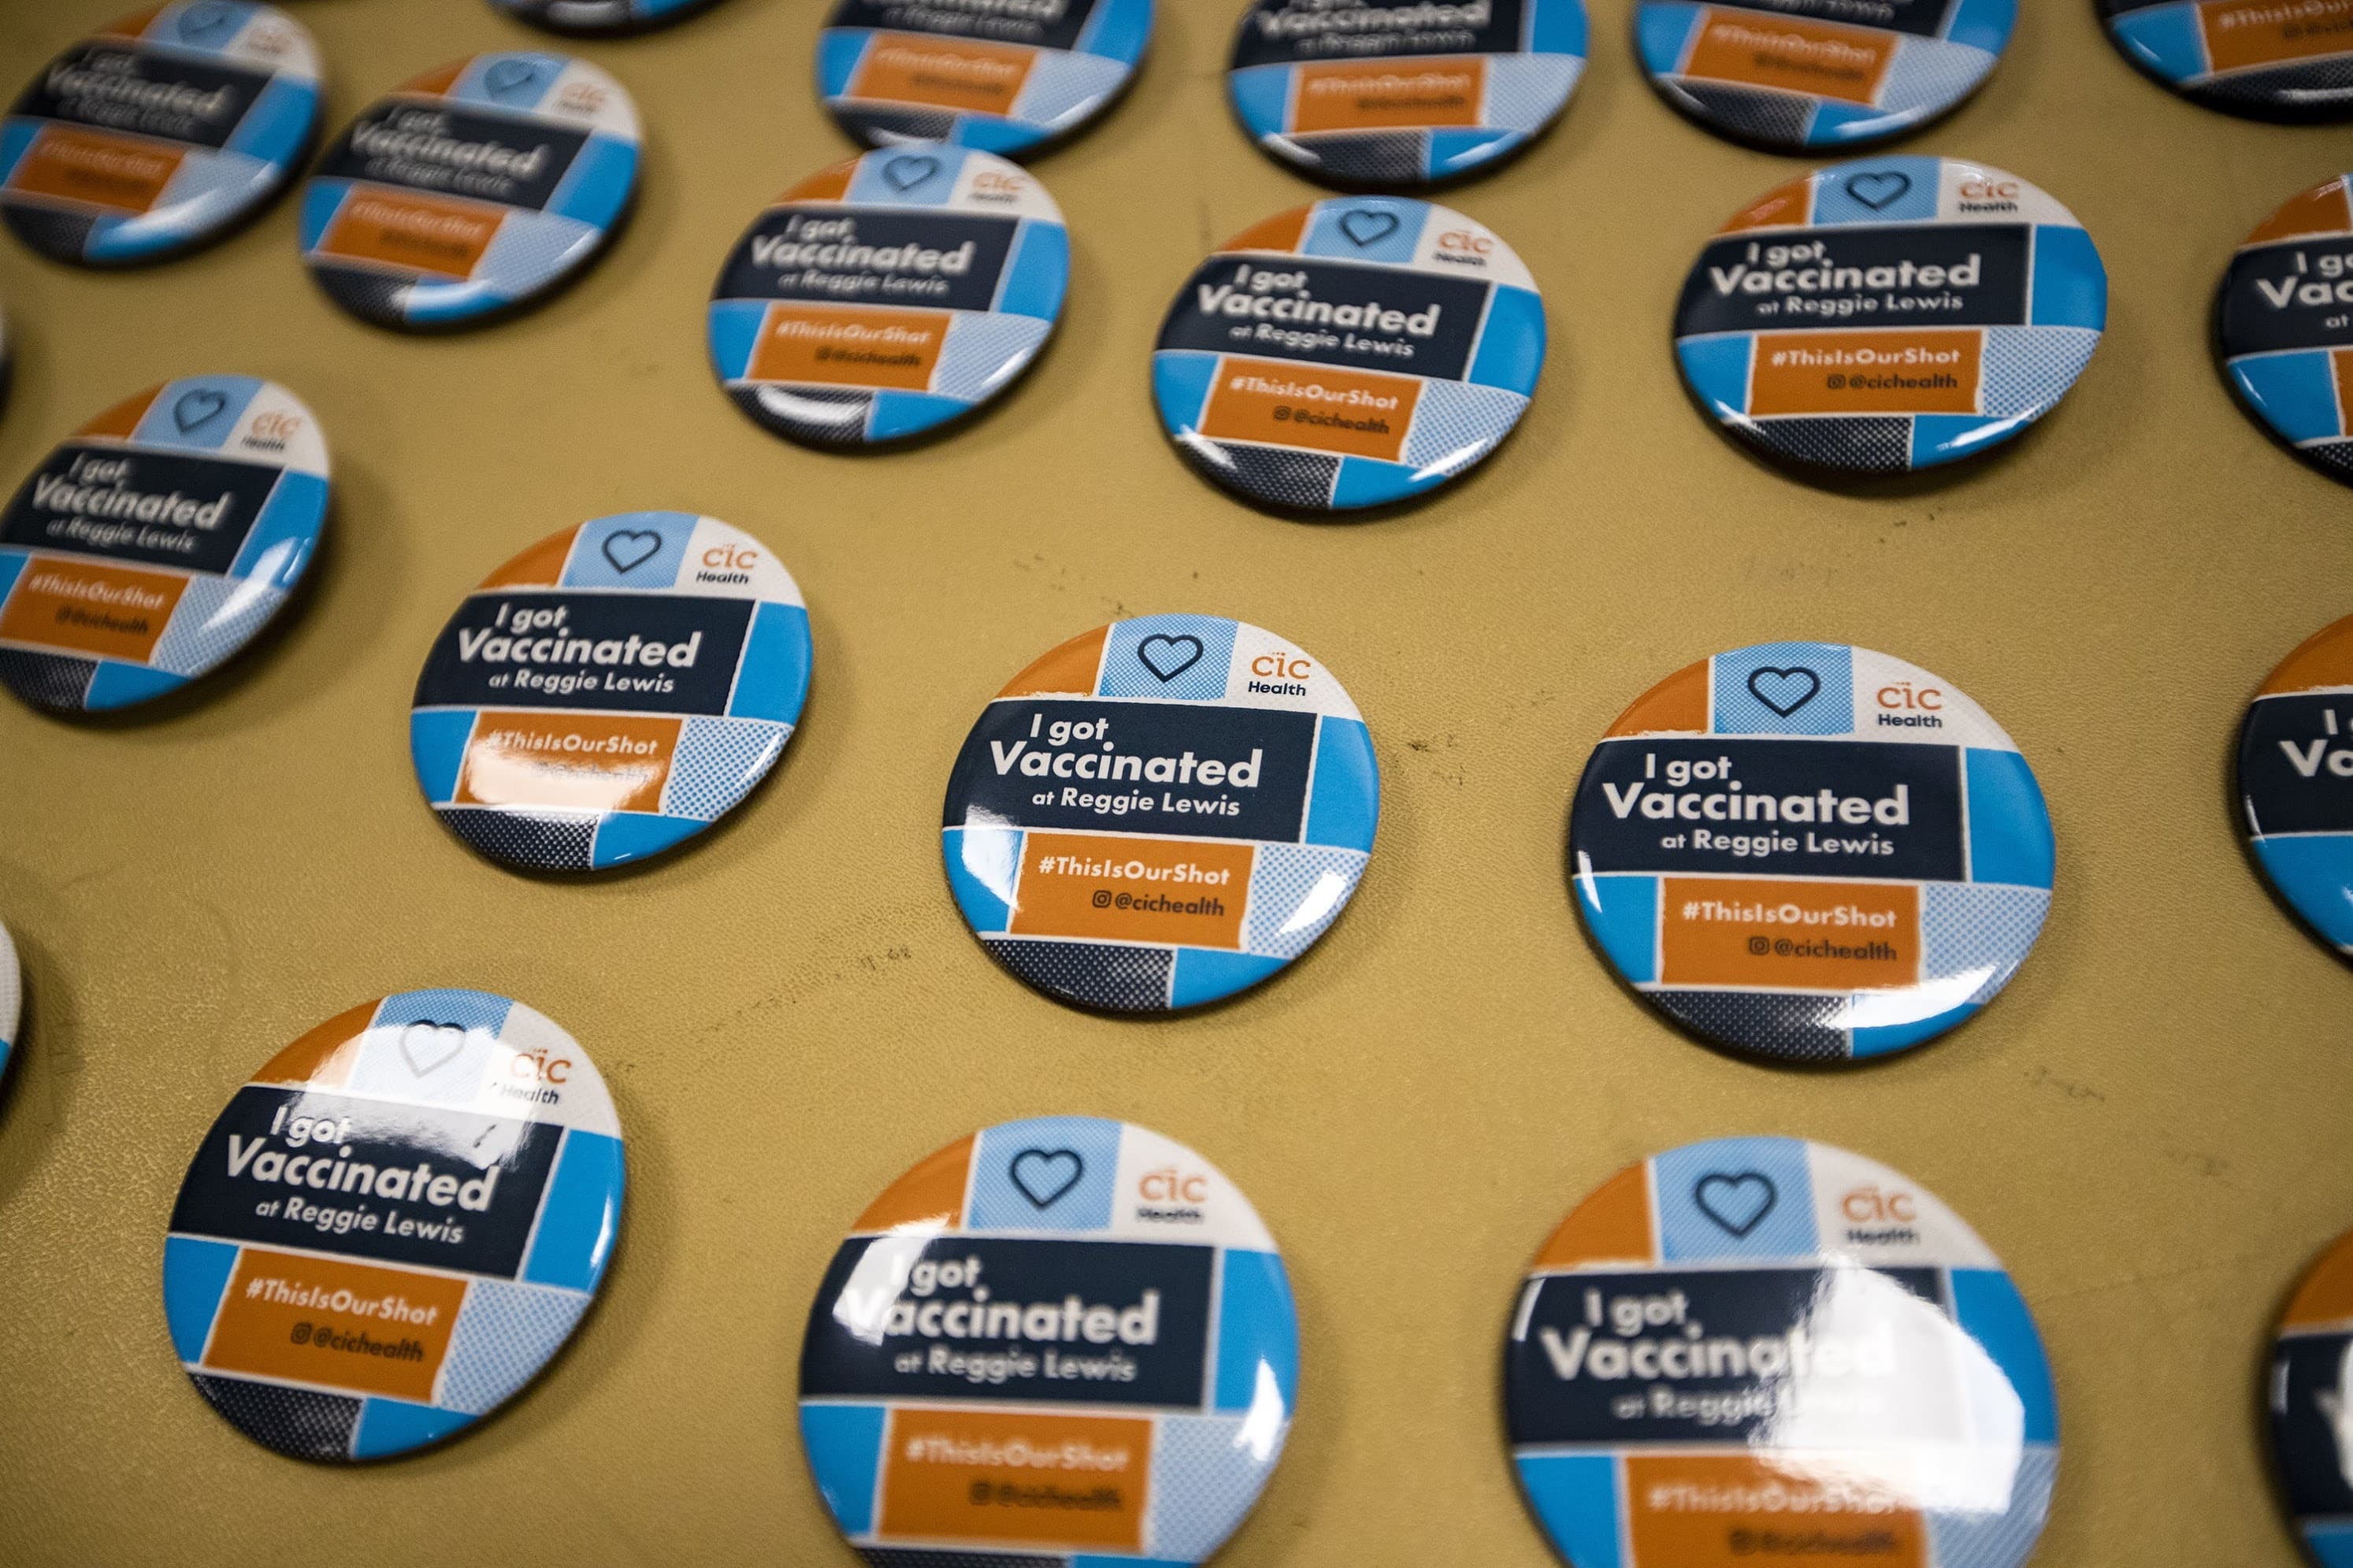 “I got vaccinated” buttons on a table for recipients of the Pfizer BioNTech vaccine to take on their way out of the Reggie Lewis Center. (Jesse Costa/WBUR)